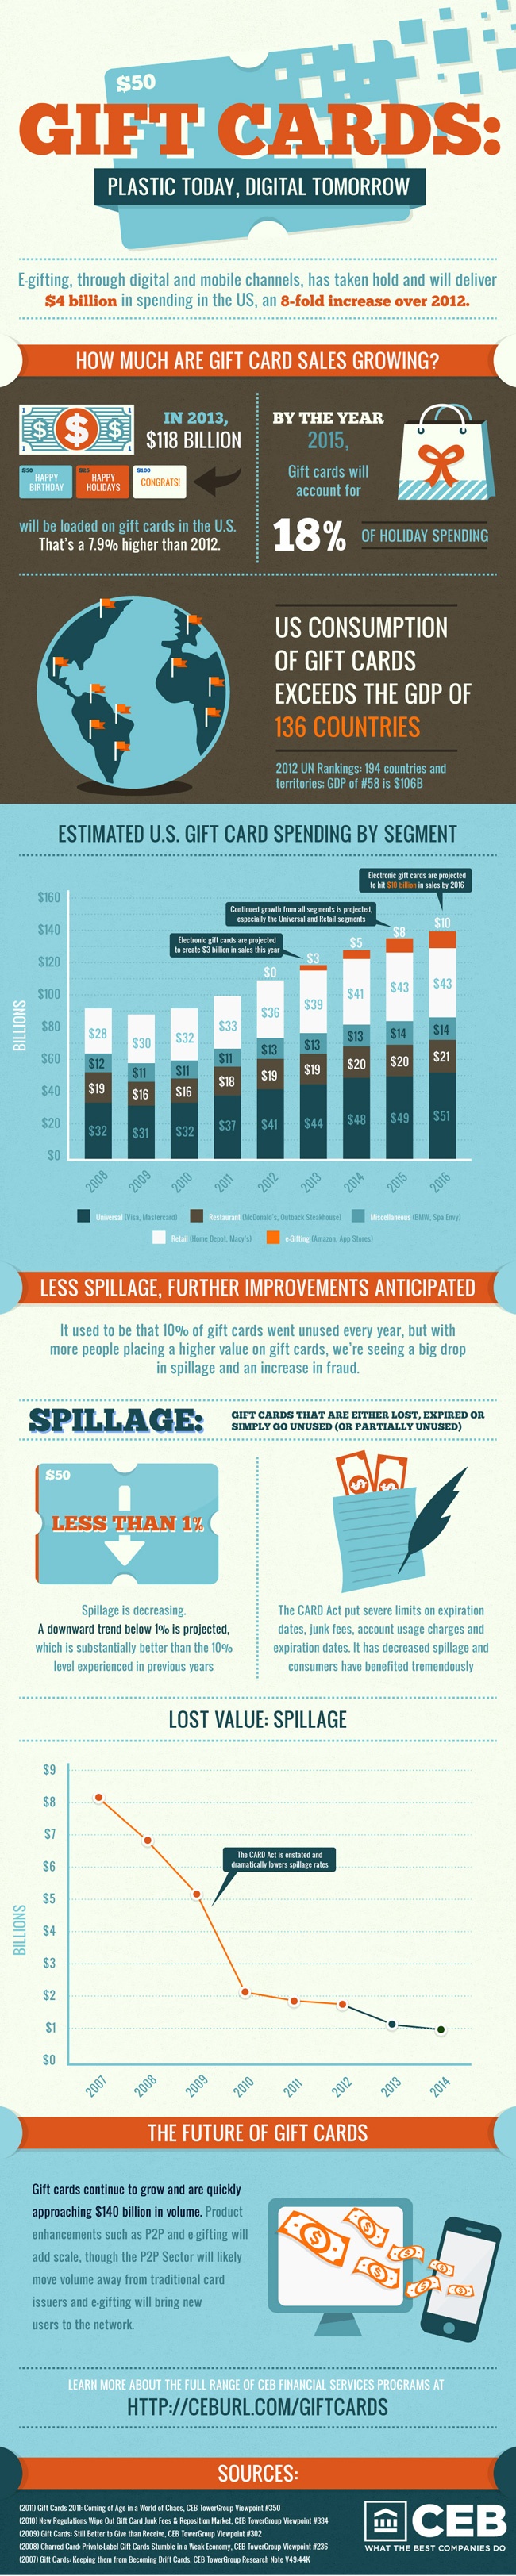 gift-card-infographic-large-2013